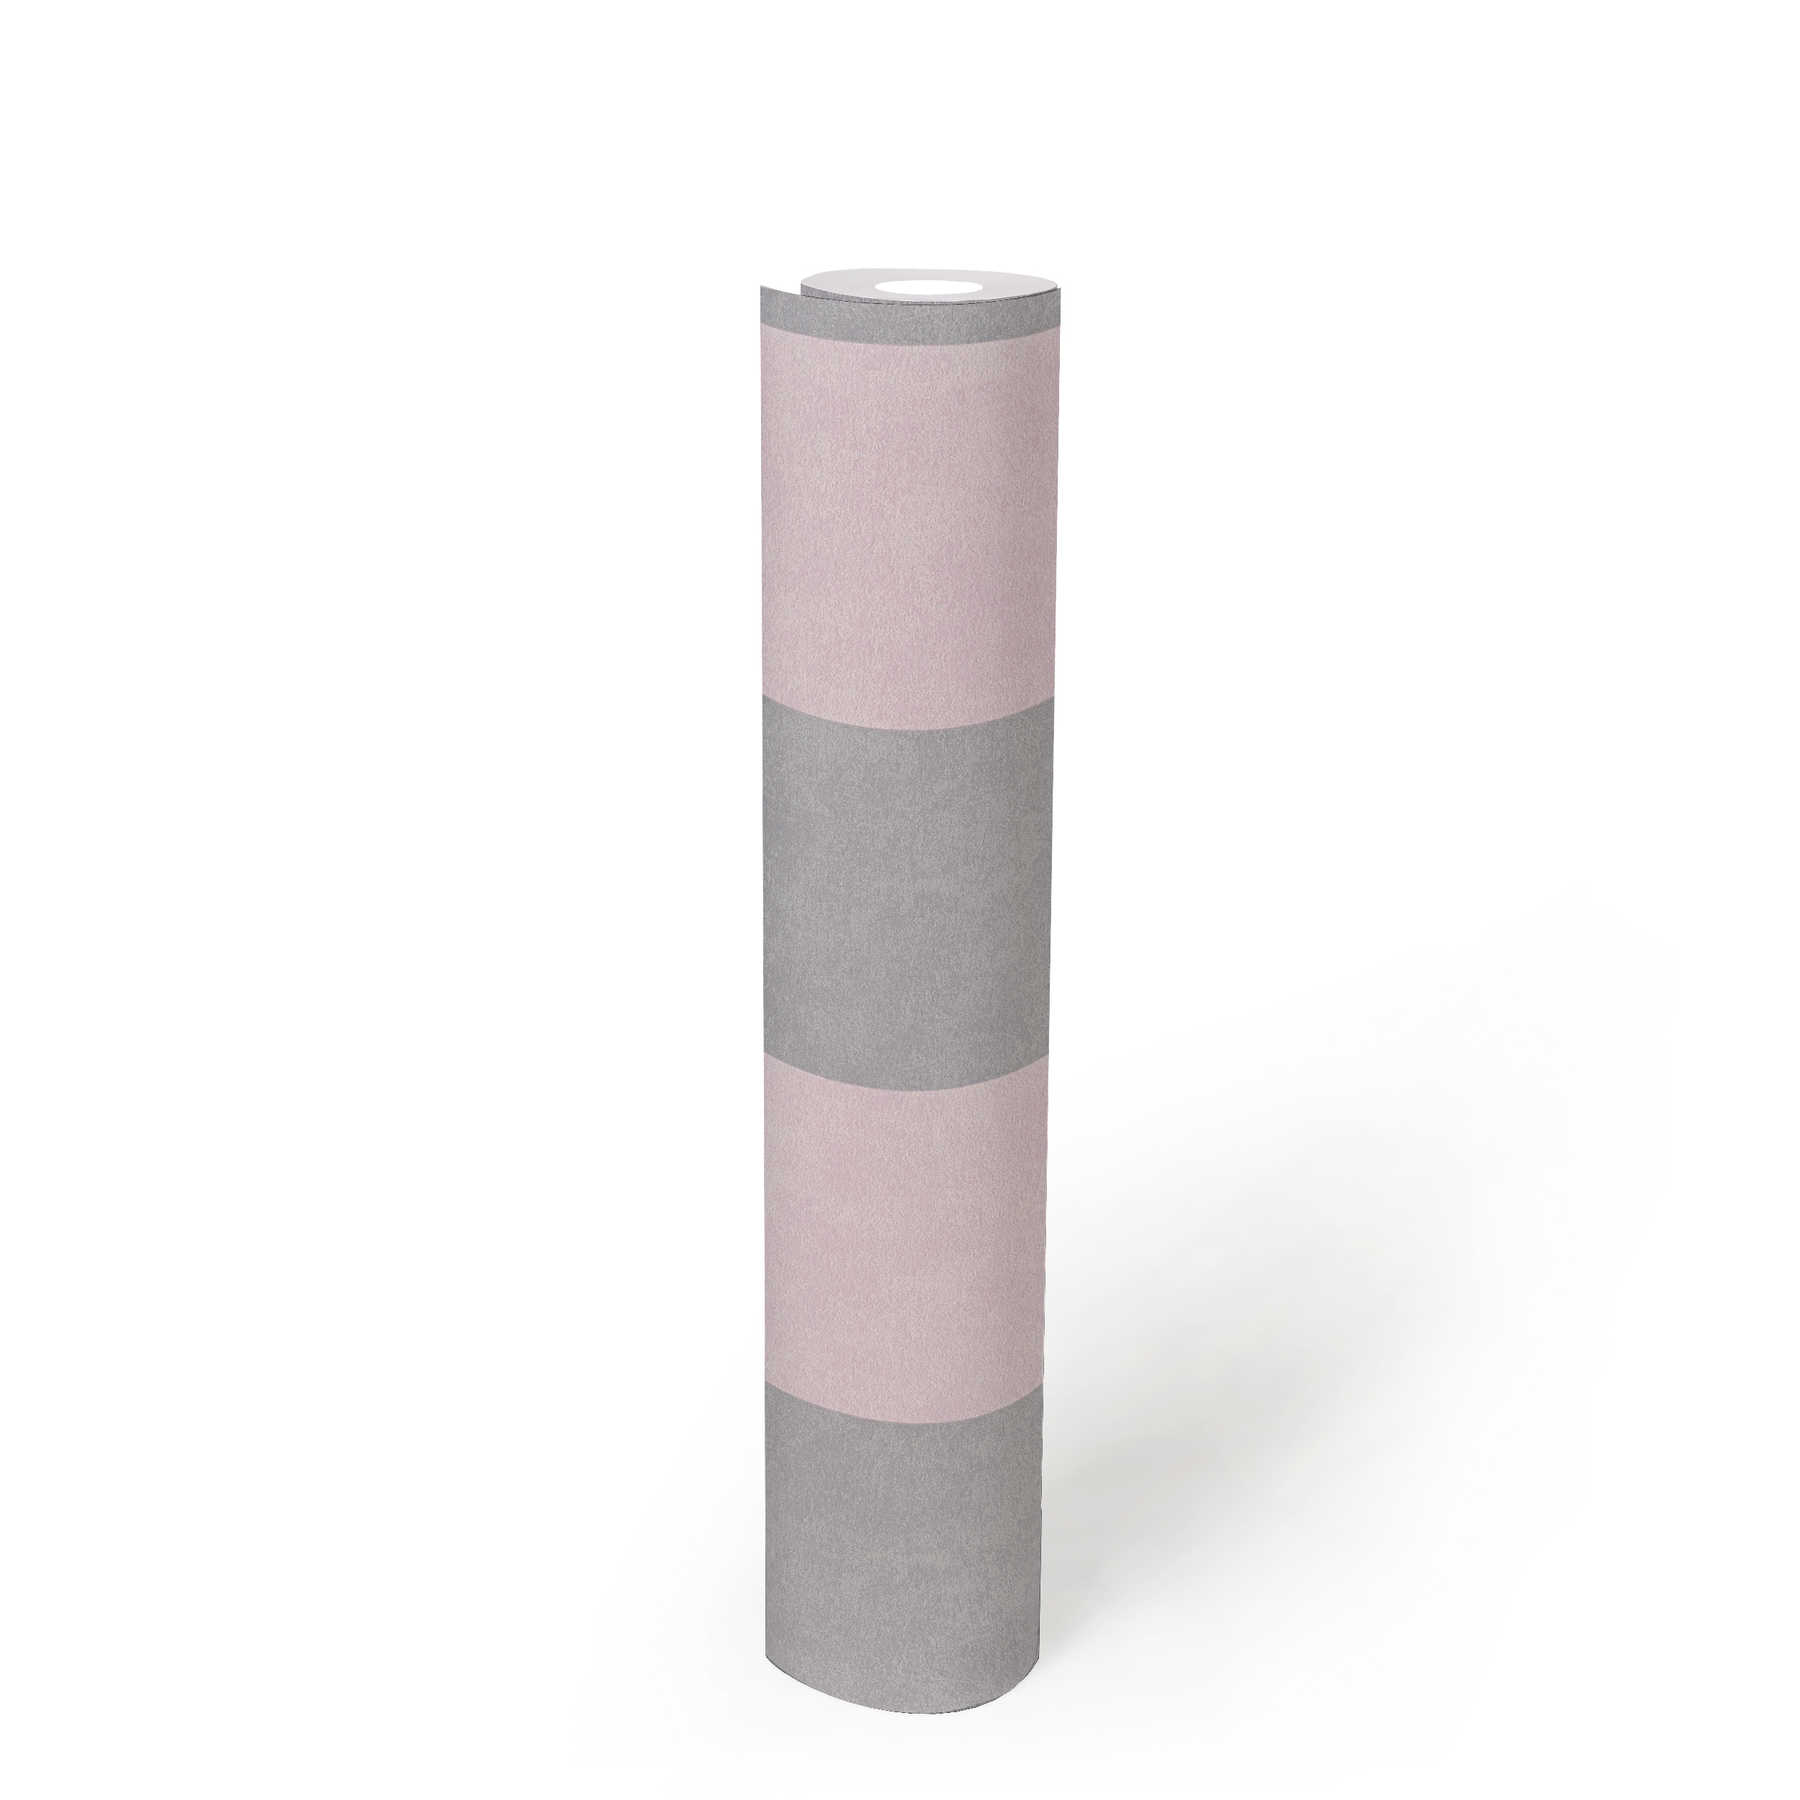             Striped wallpaper with texture pattern - grey, pink
        